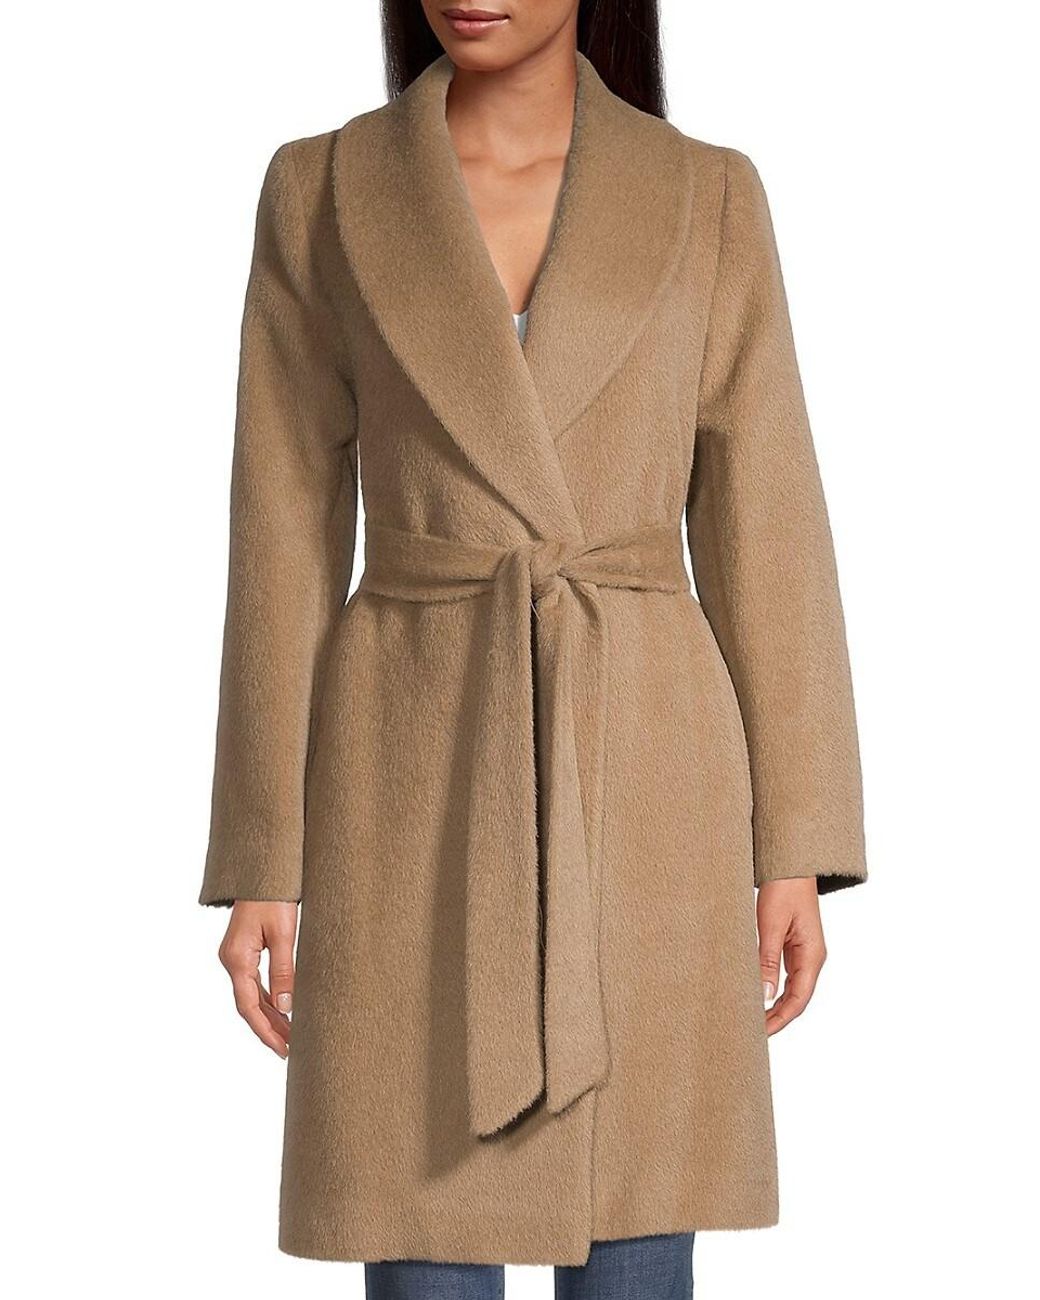 Sofia Cashmere Belted Shawl Collar Wrap Coat in Natural | Lyst